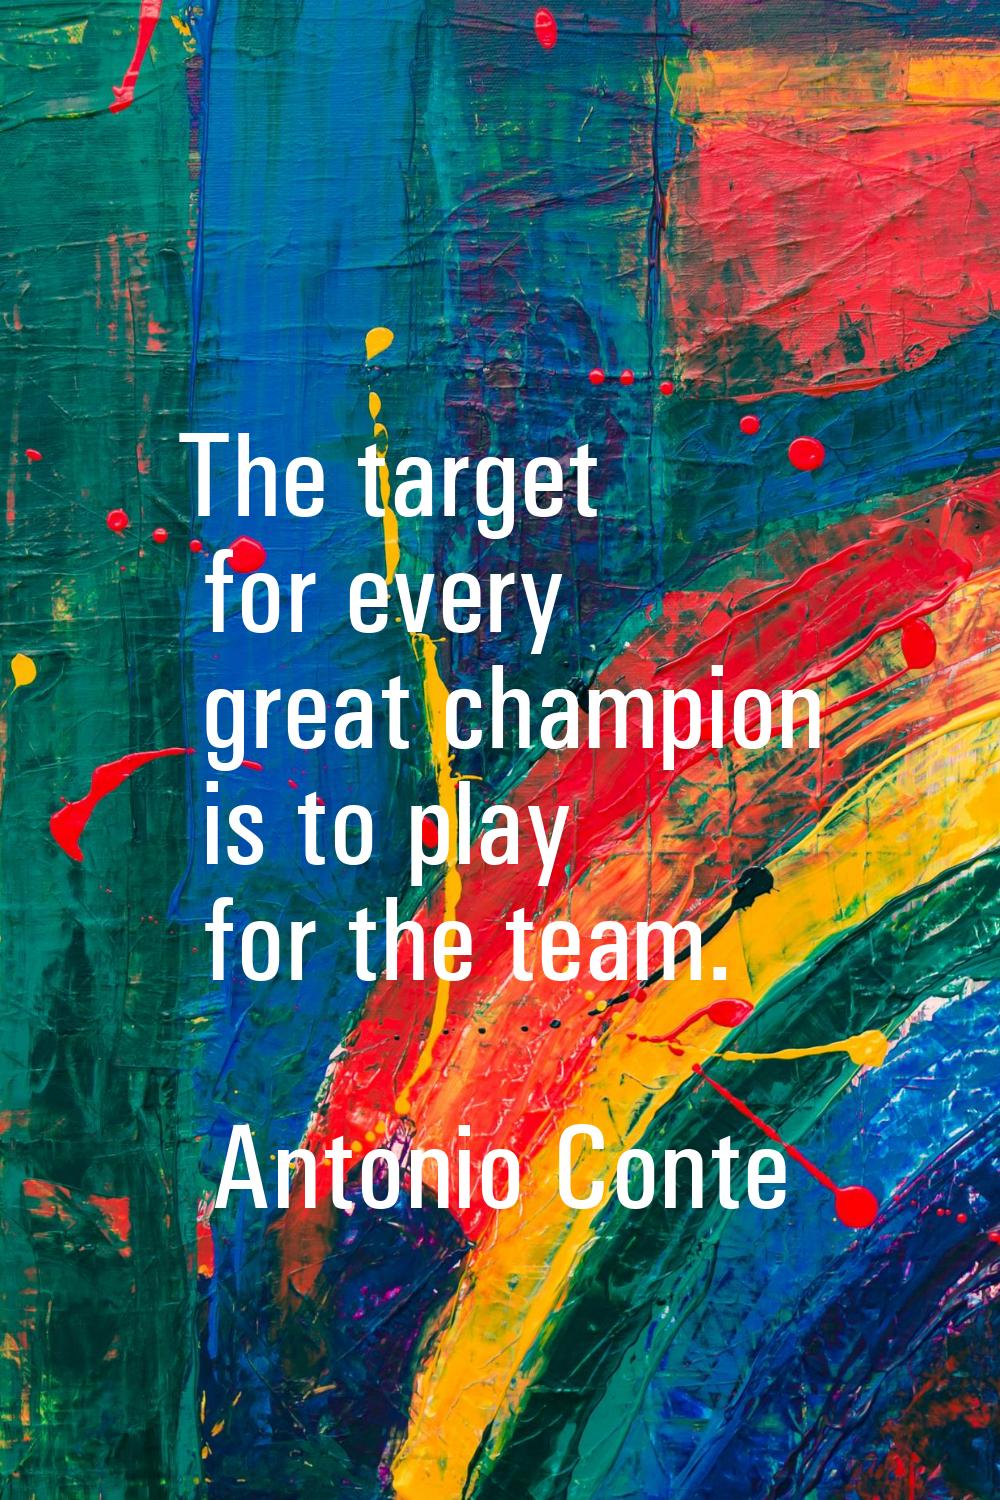 The target for every great champion is to play for the team.